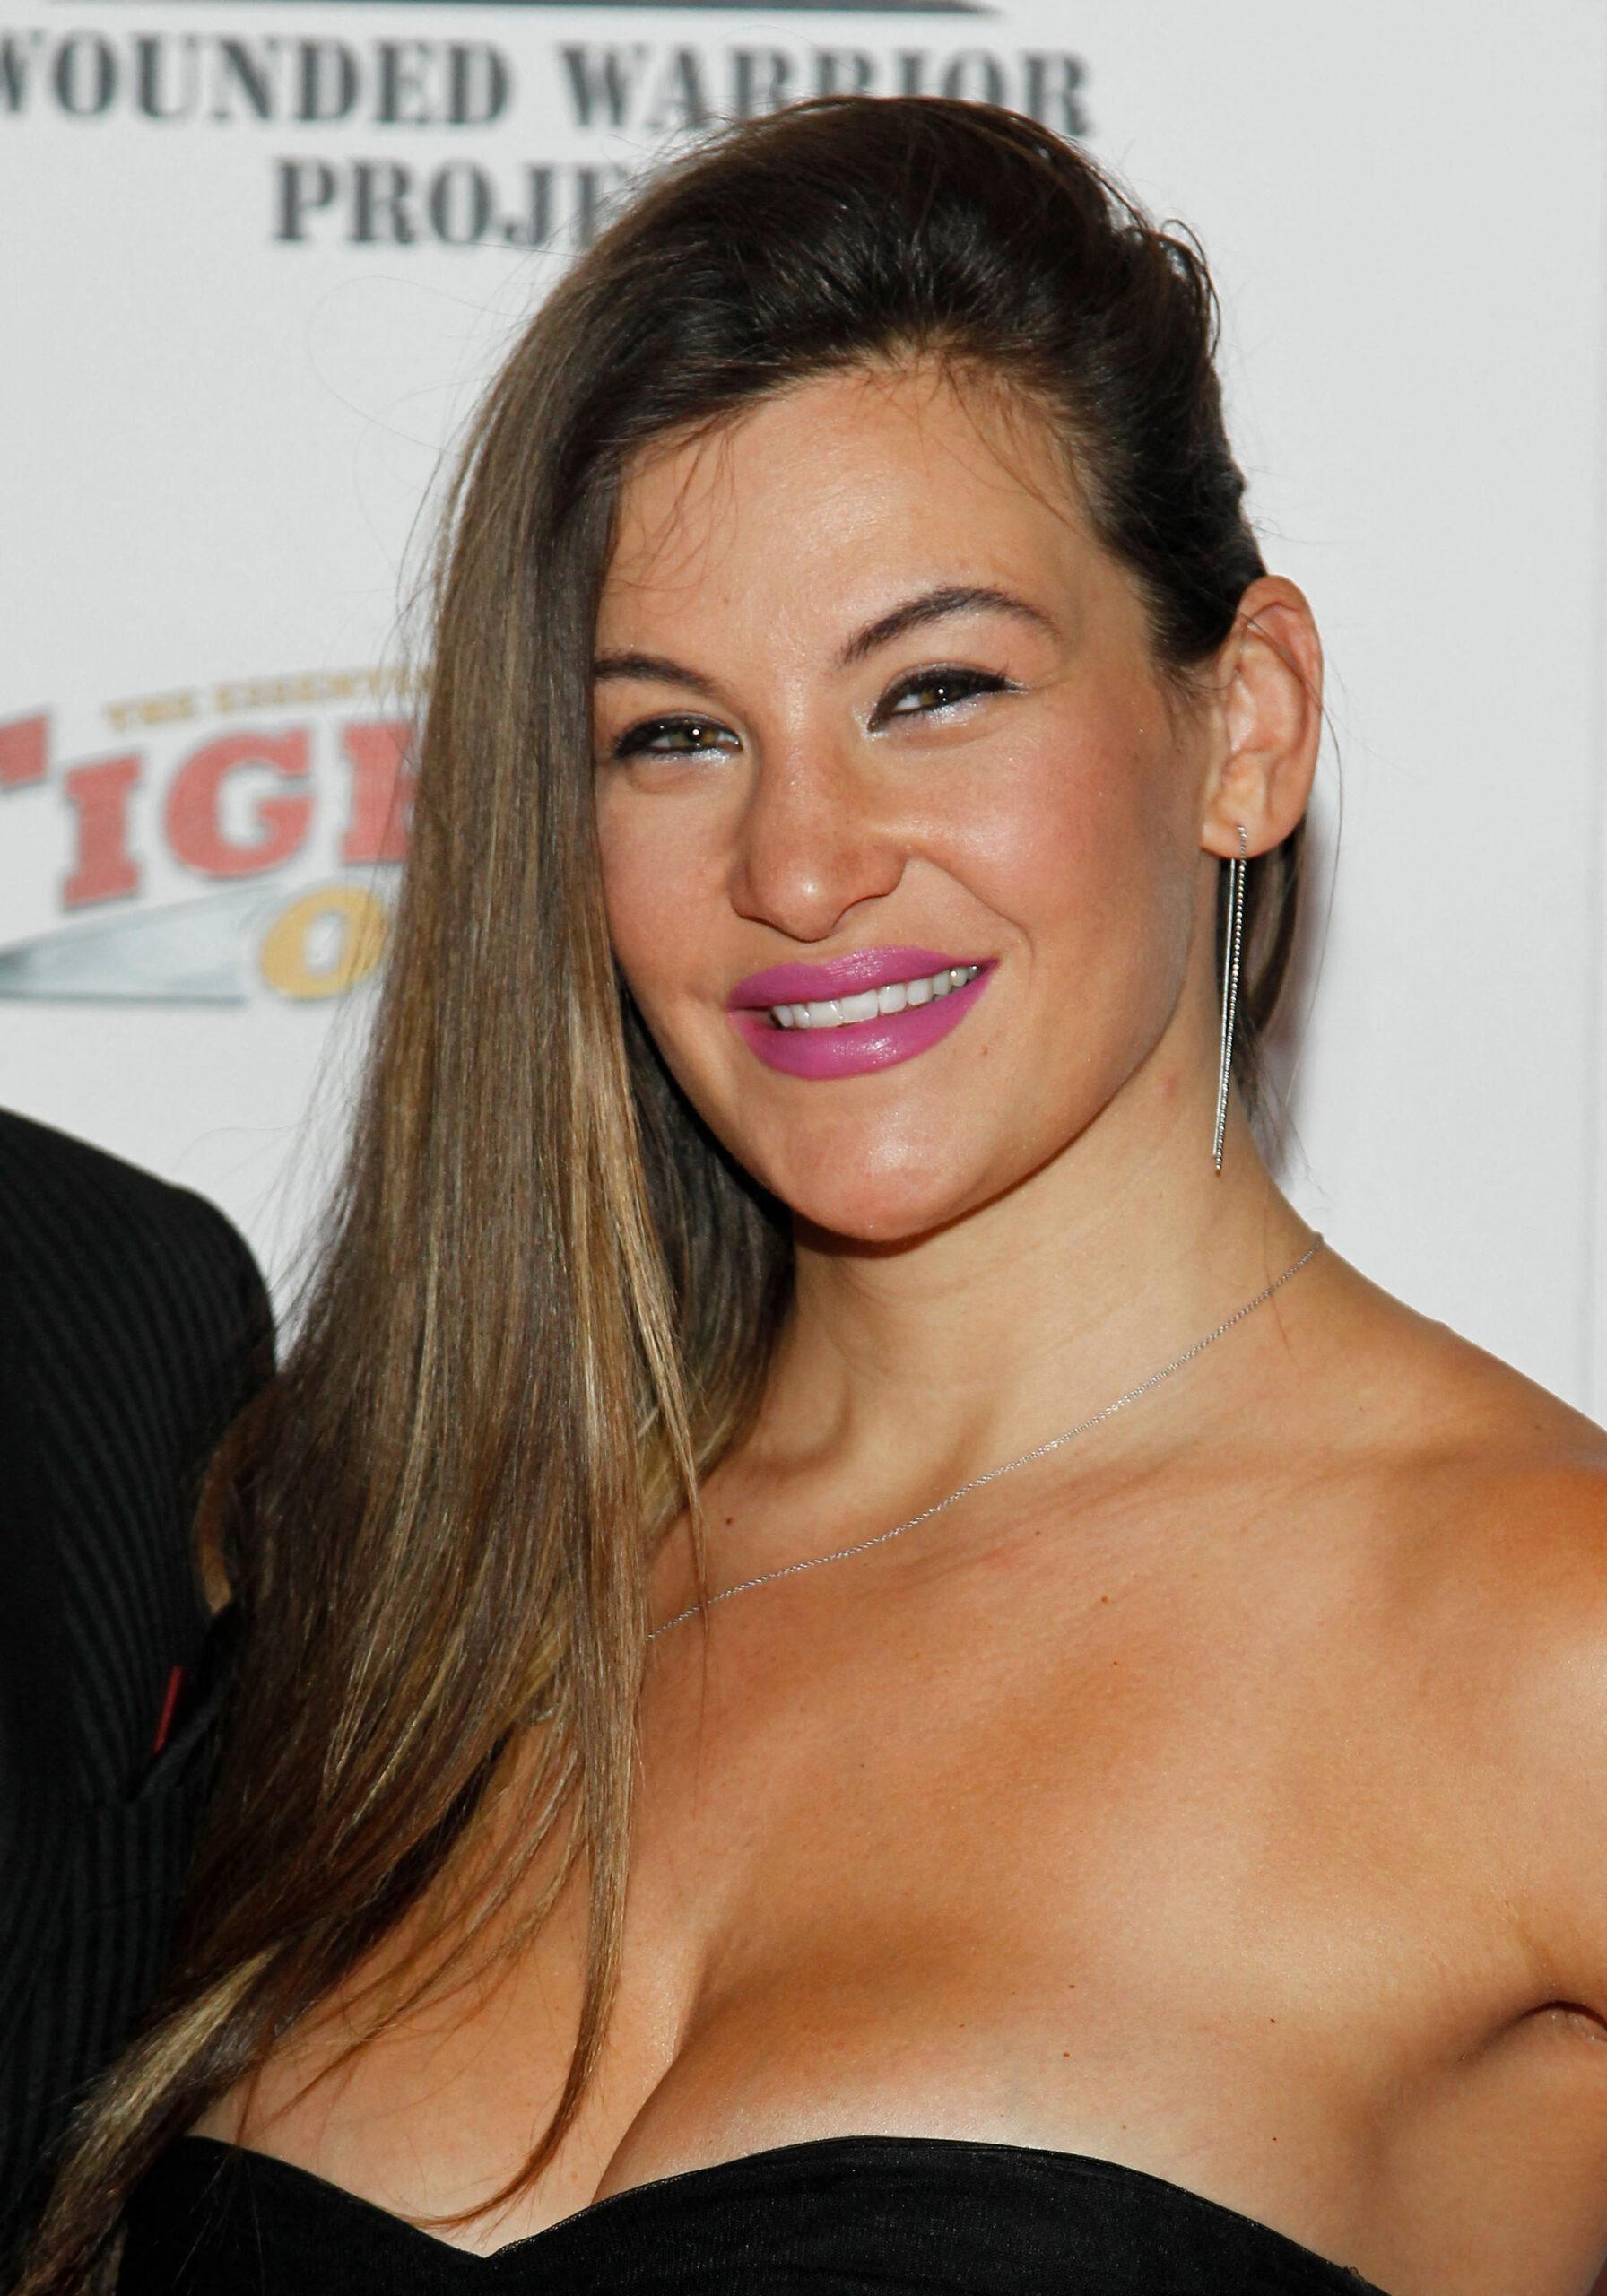 UFC's Miesha Tate Shows She DROPPED Weight In New Ab-Filled Pics